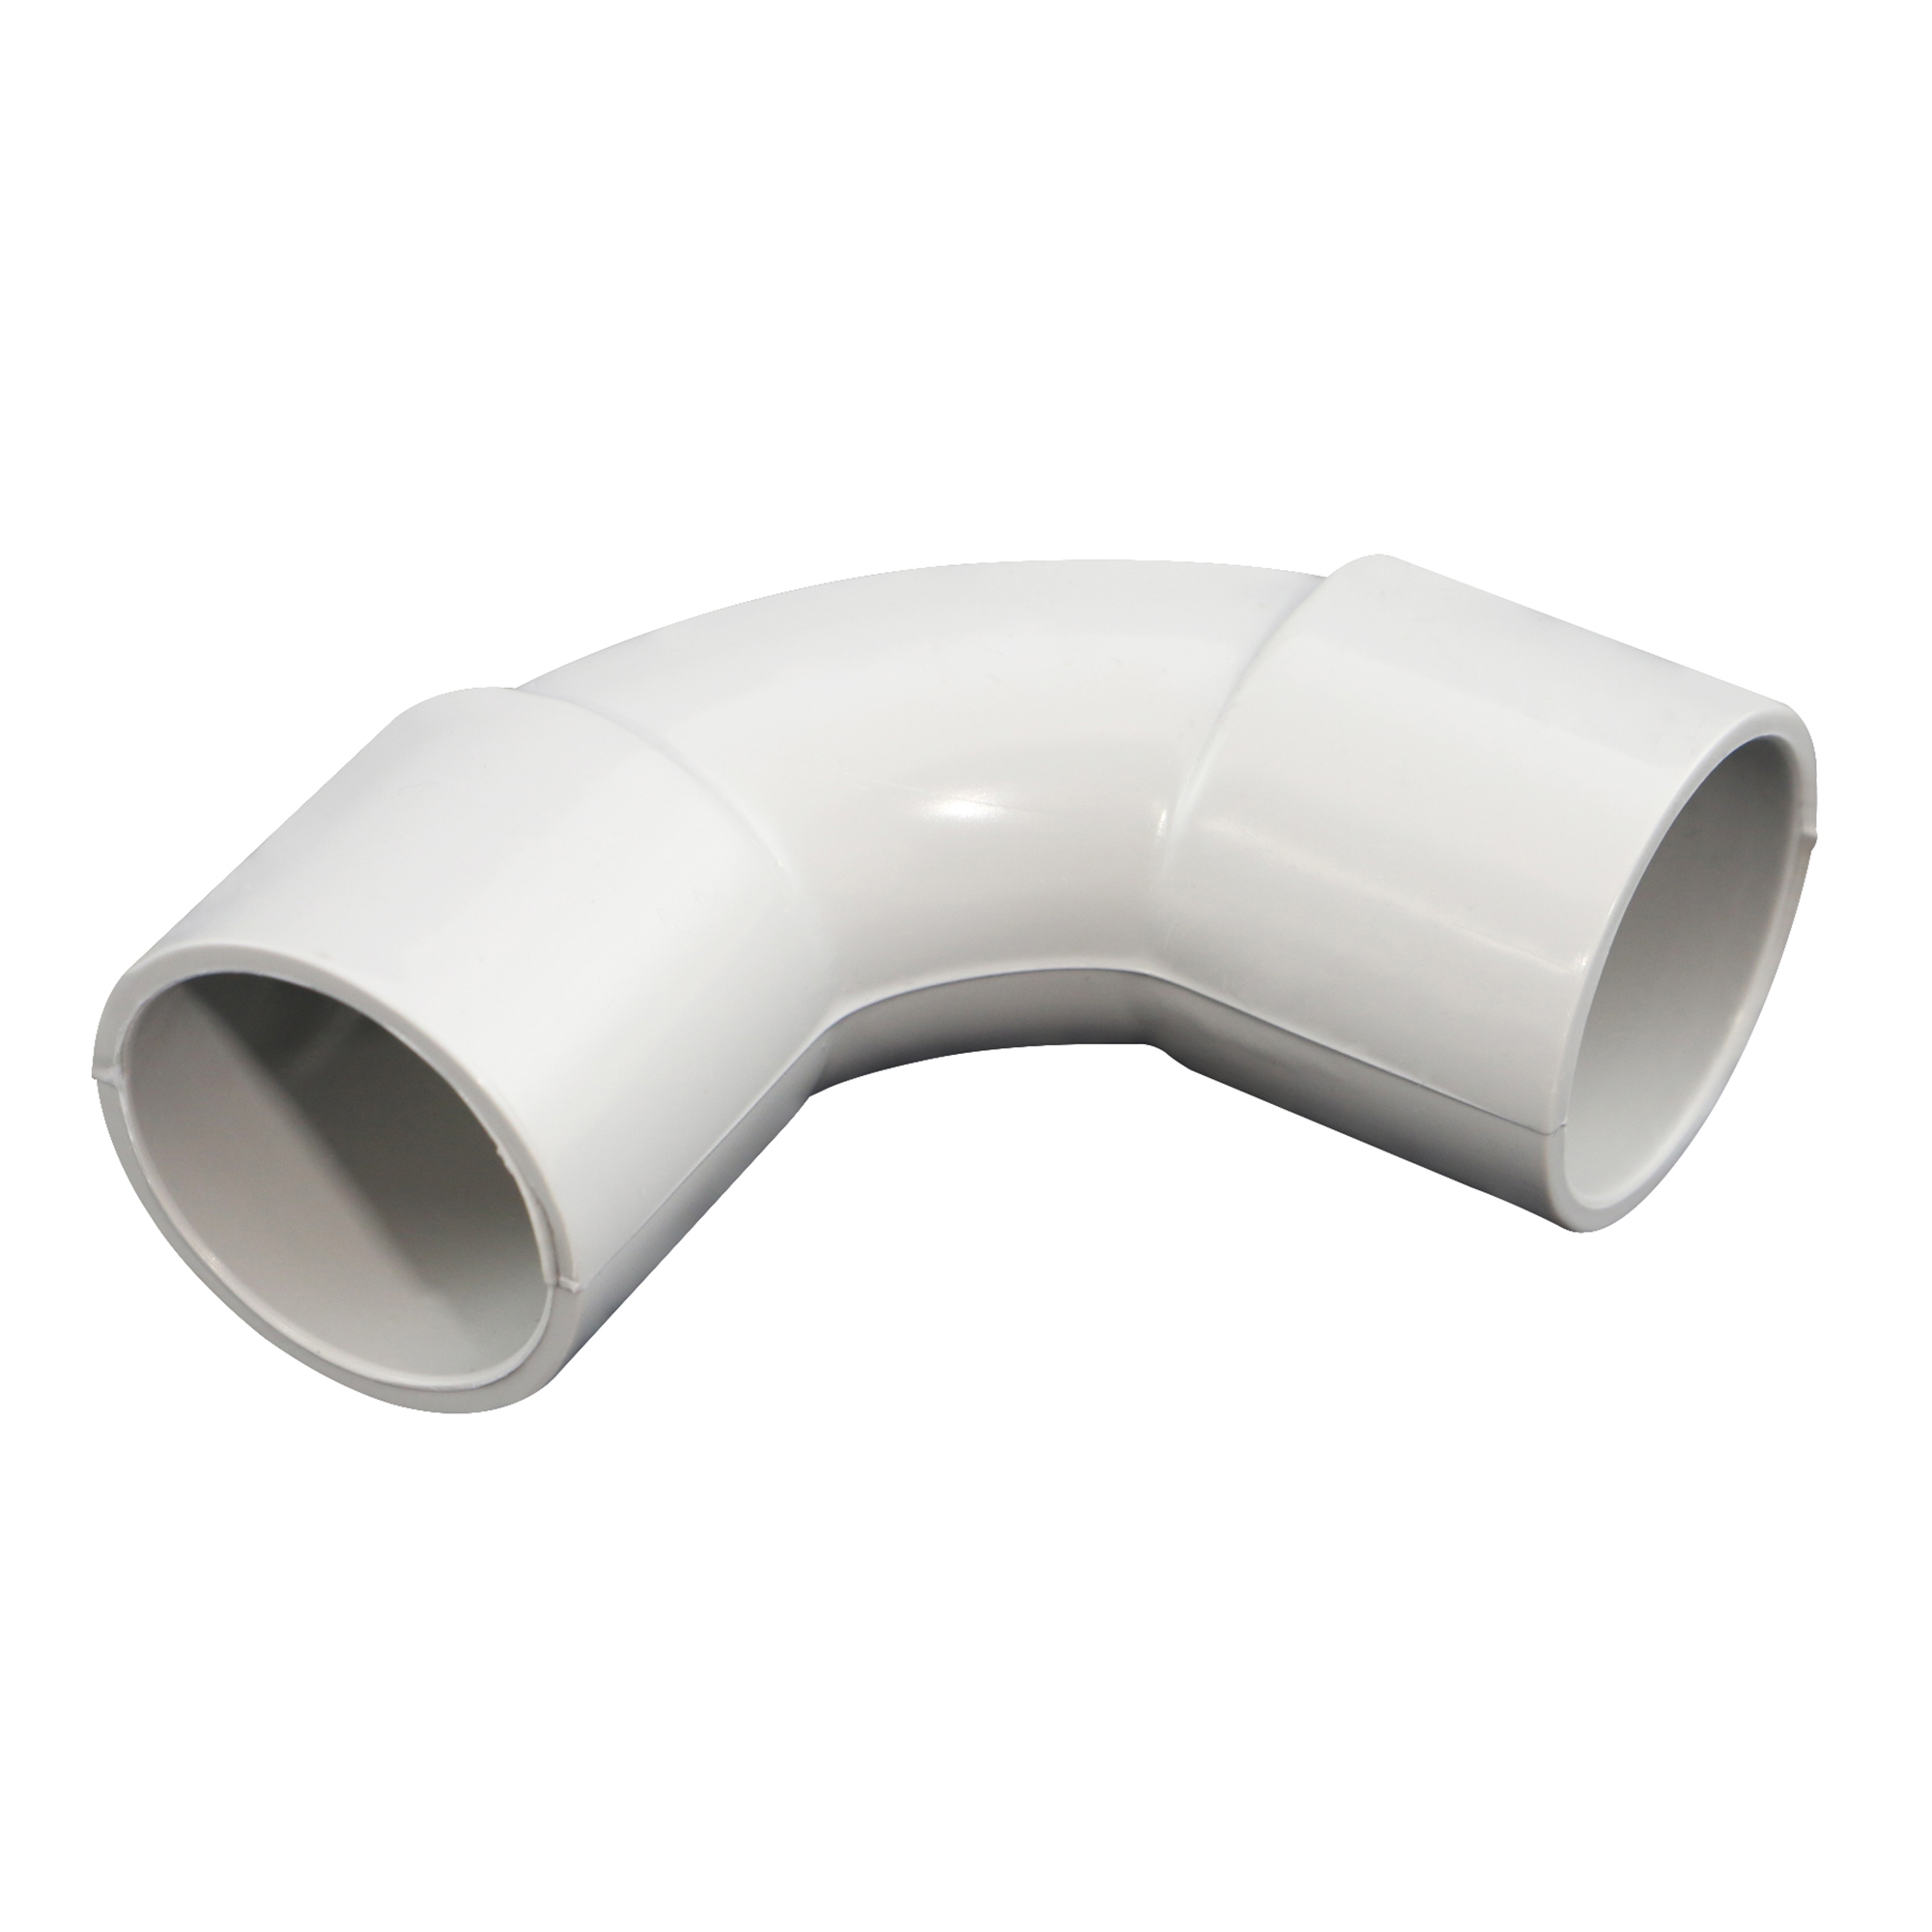 25 mm Solid Elbow